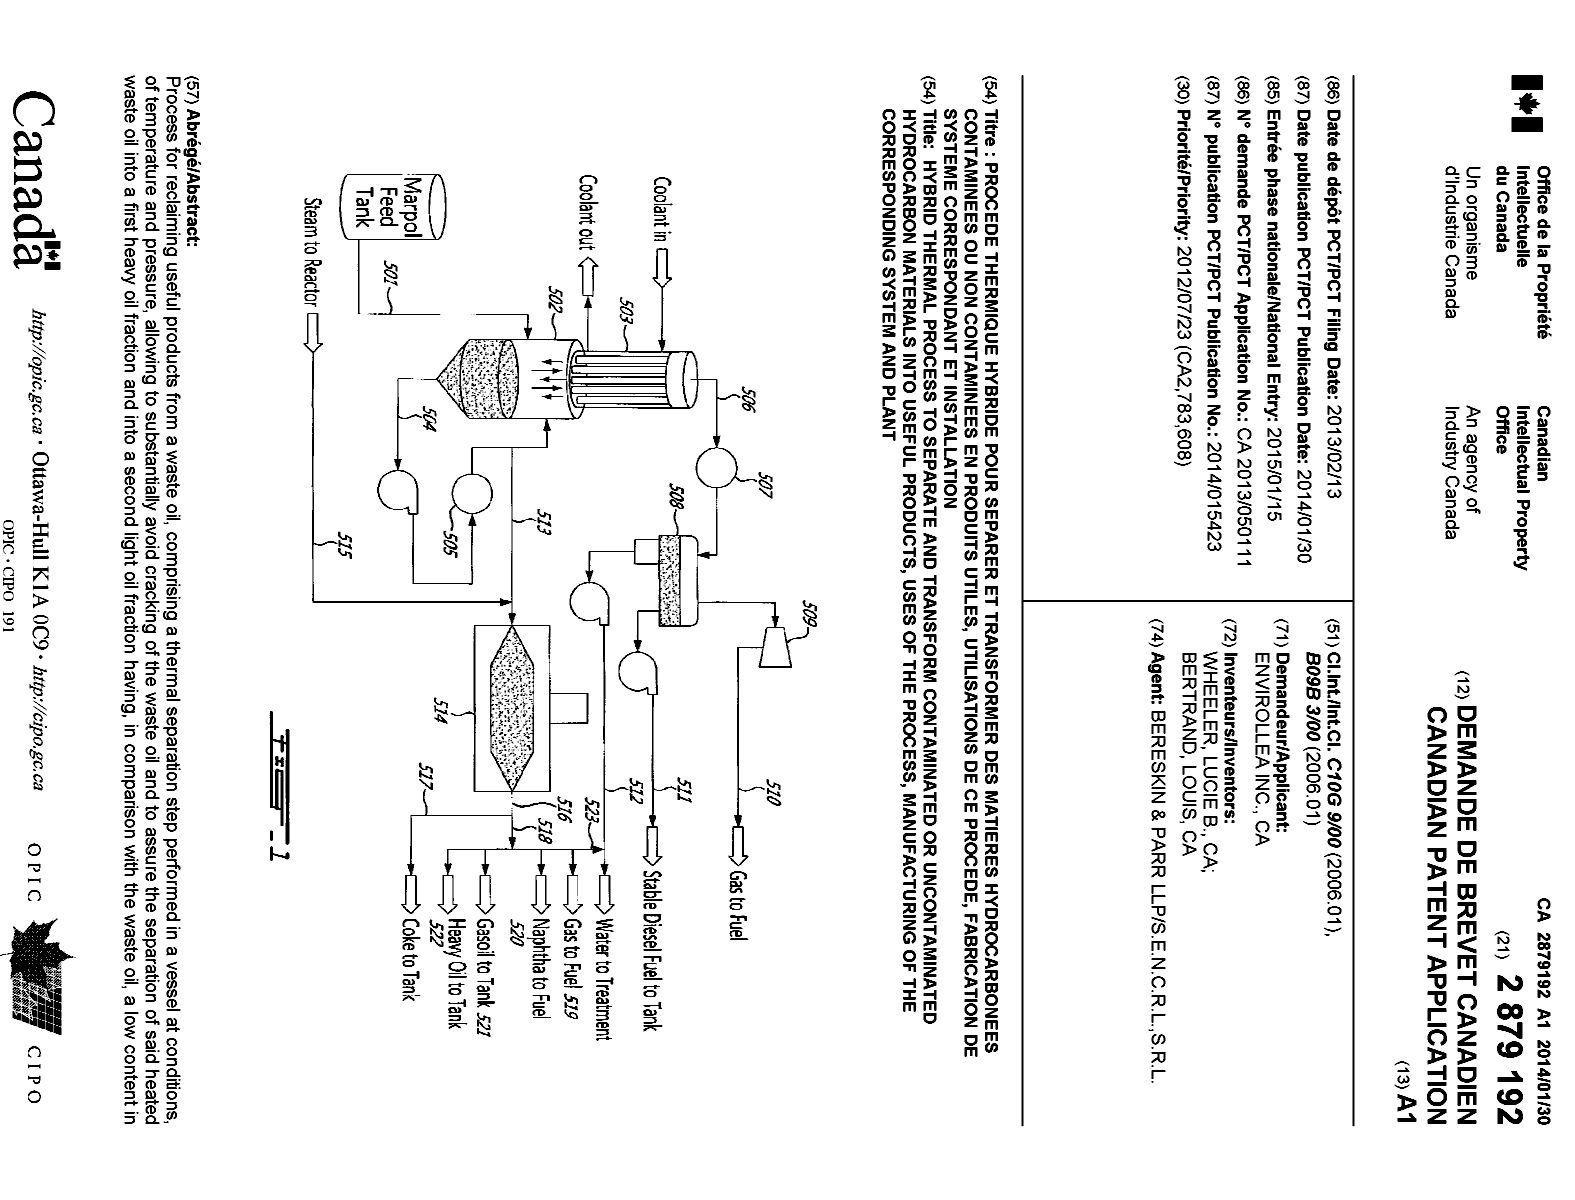 Canadian Patent Document 2879192. Cover Page 20150225. Image 1 of 2